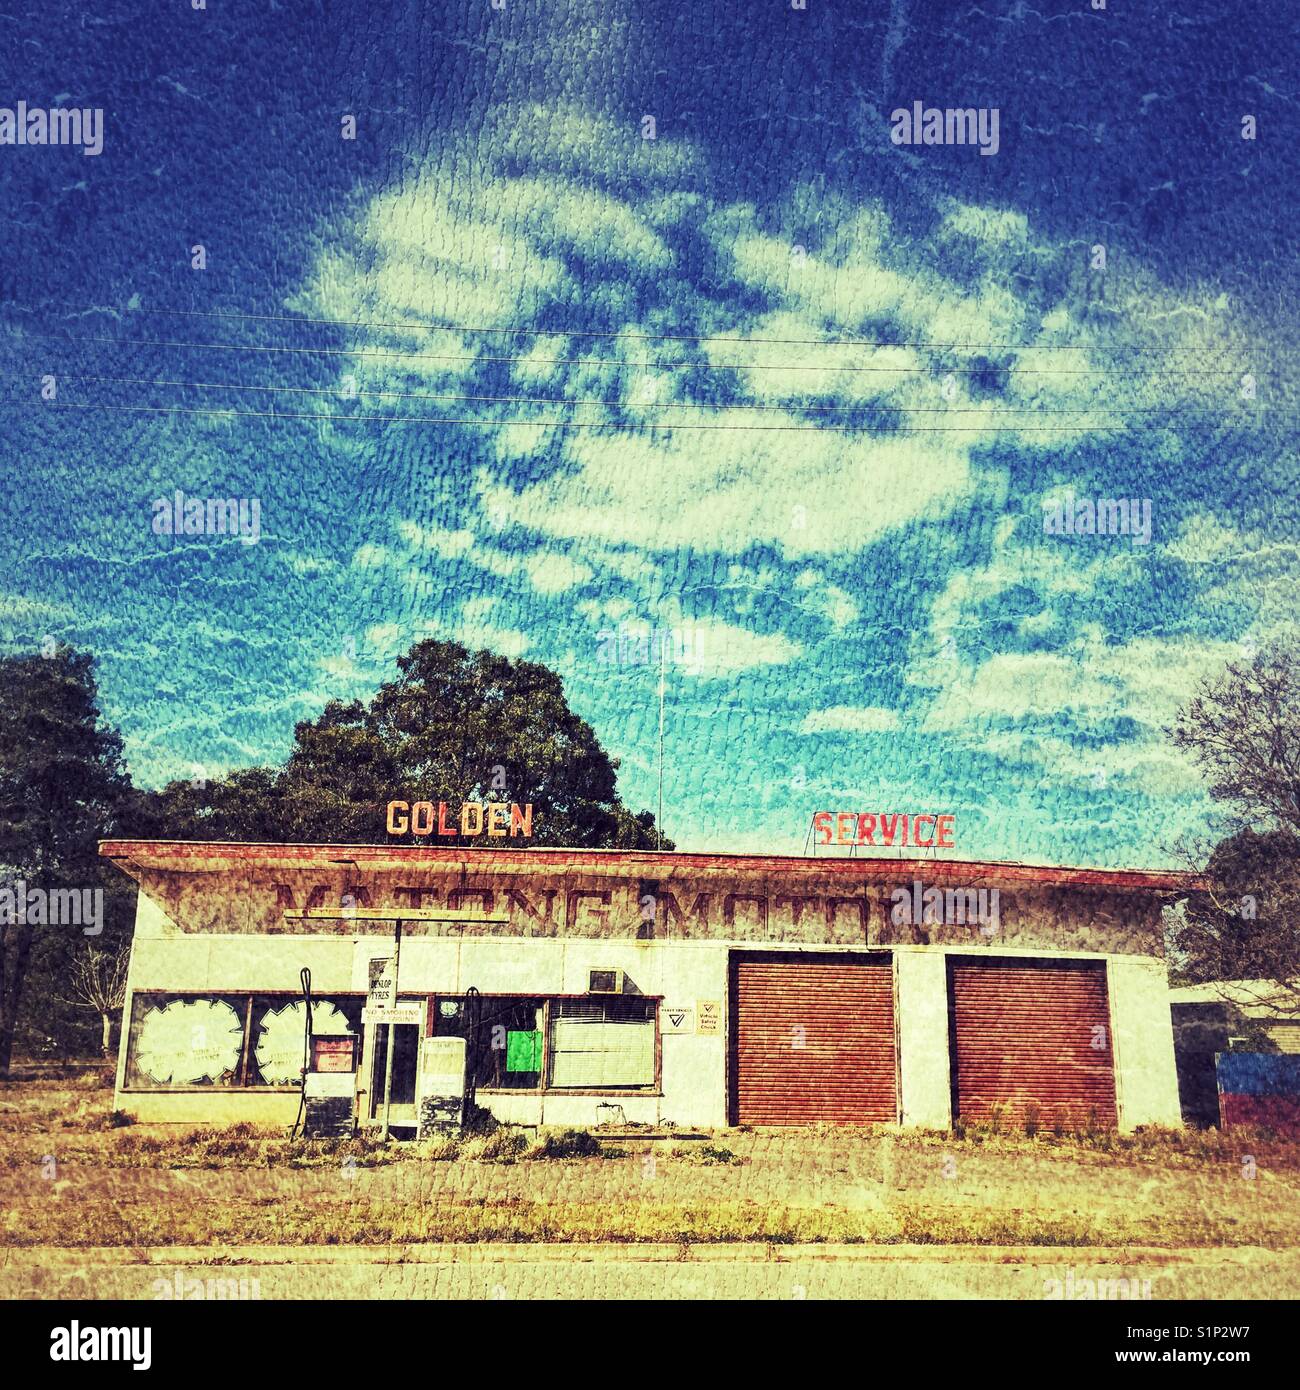 Old abandoned service station in small rural town. Matong, NSW, Australia Stock Photo